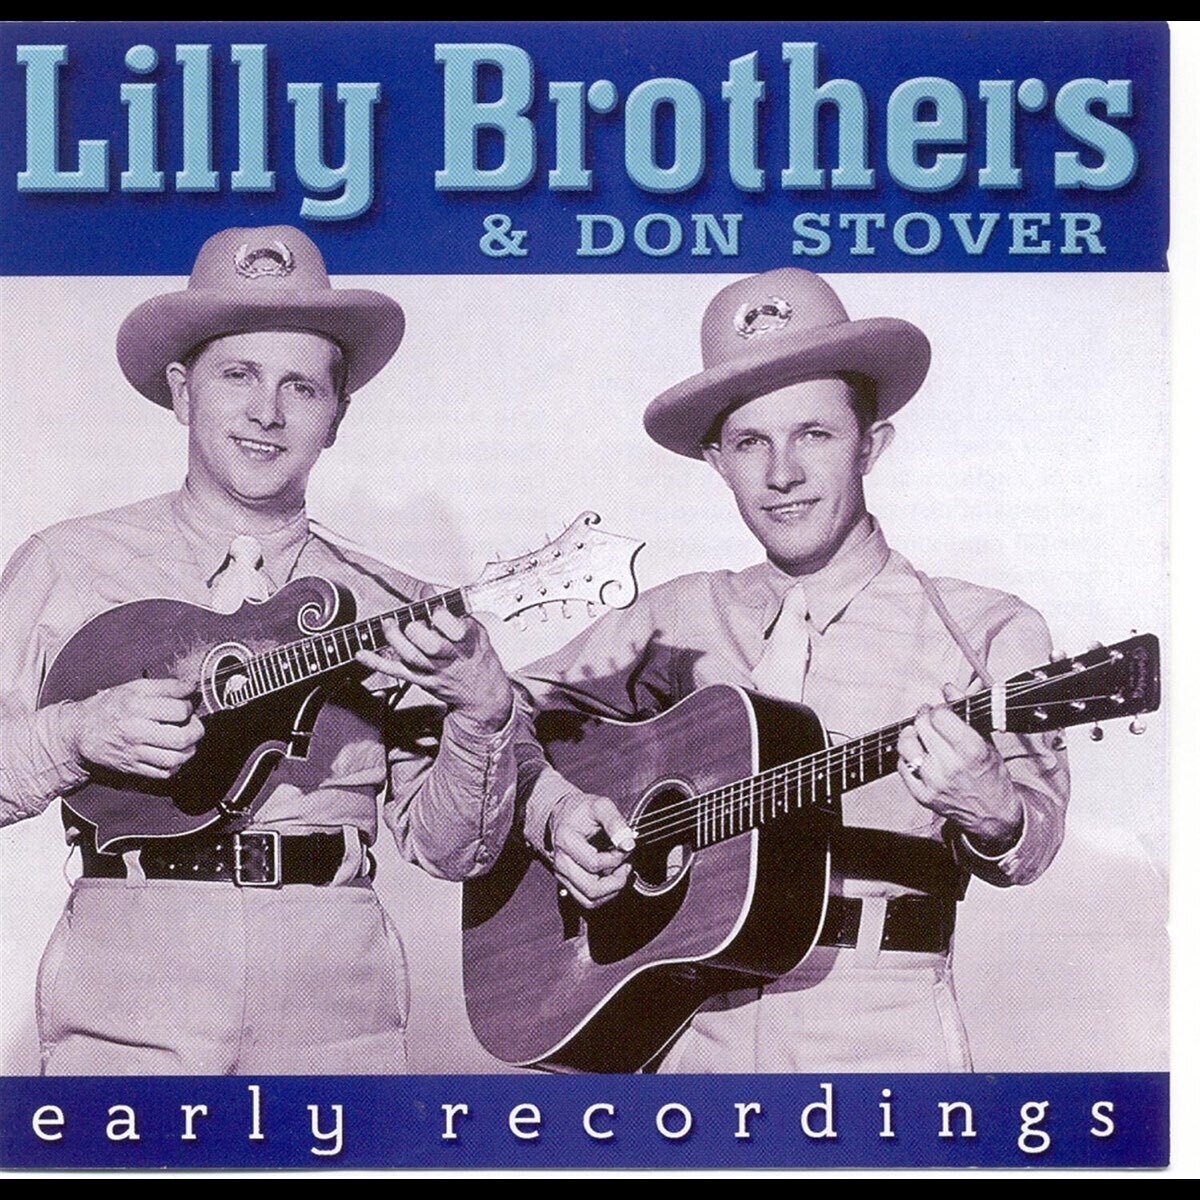 Lilly Brothers & Don Stover Early Recordings